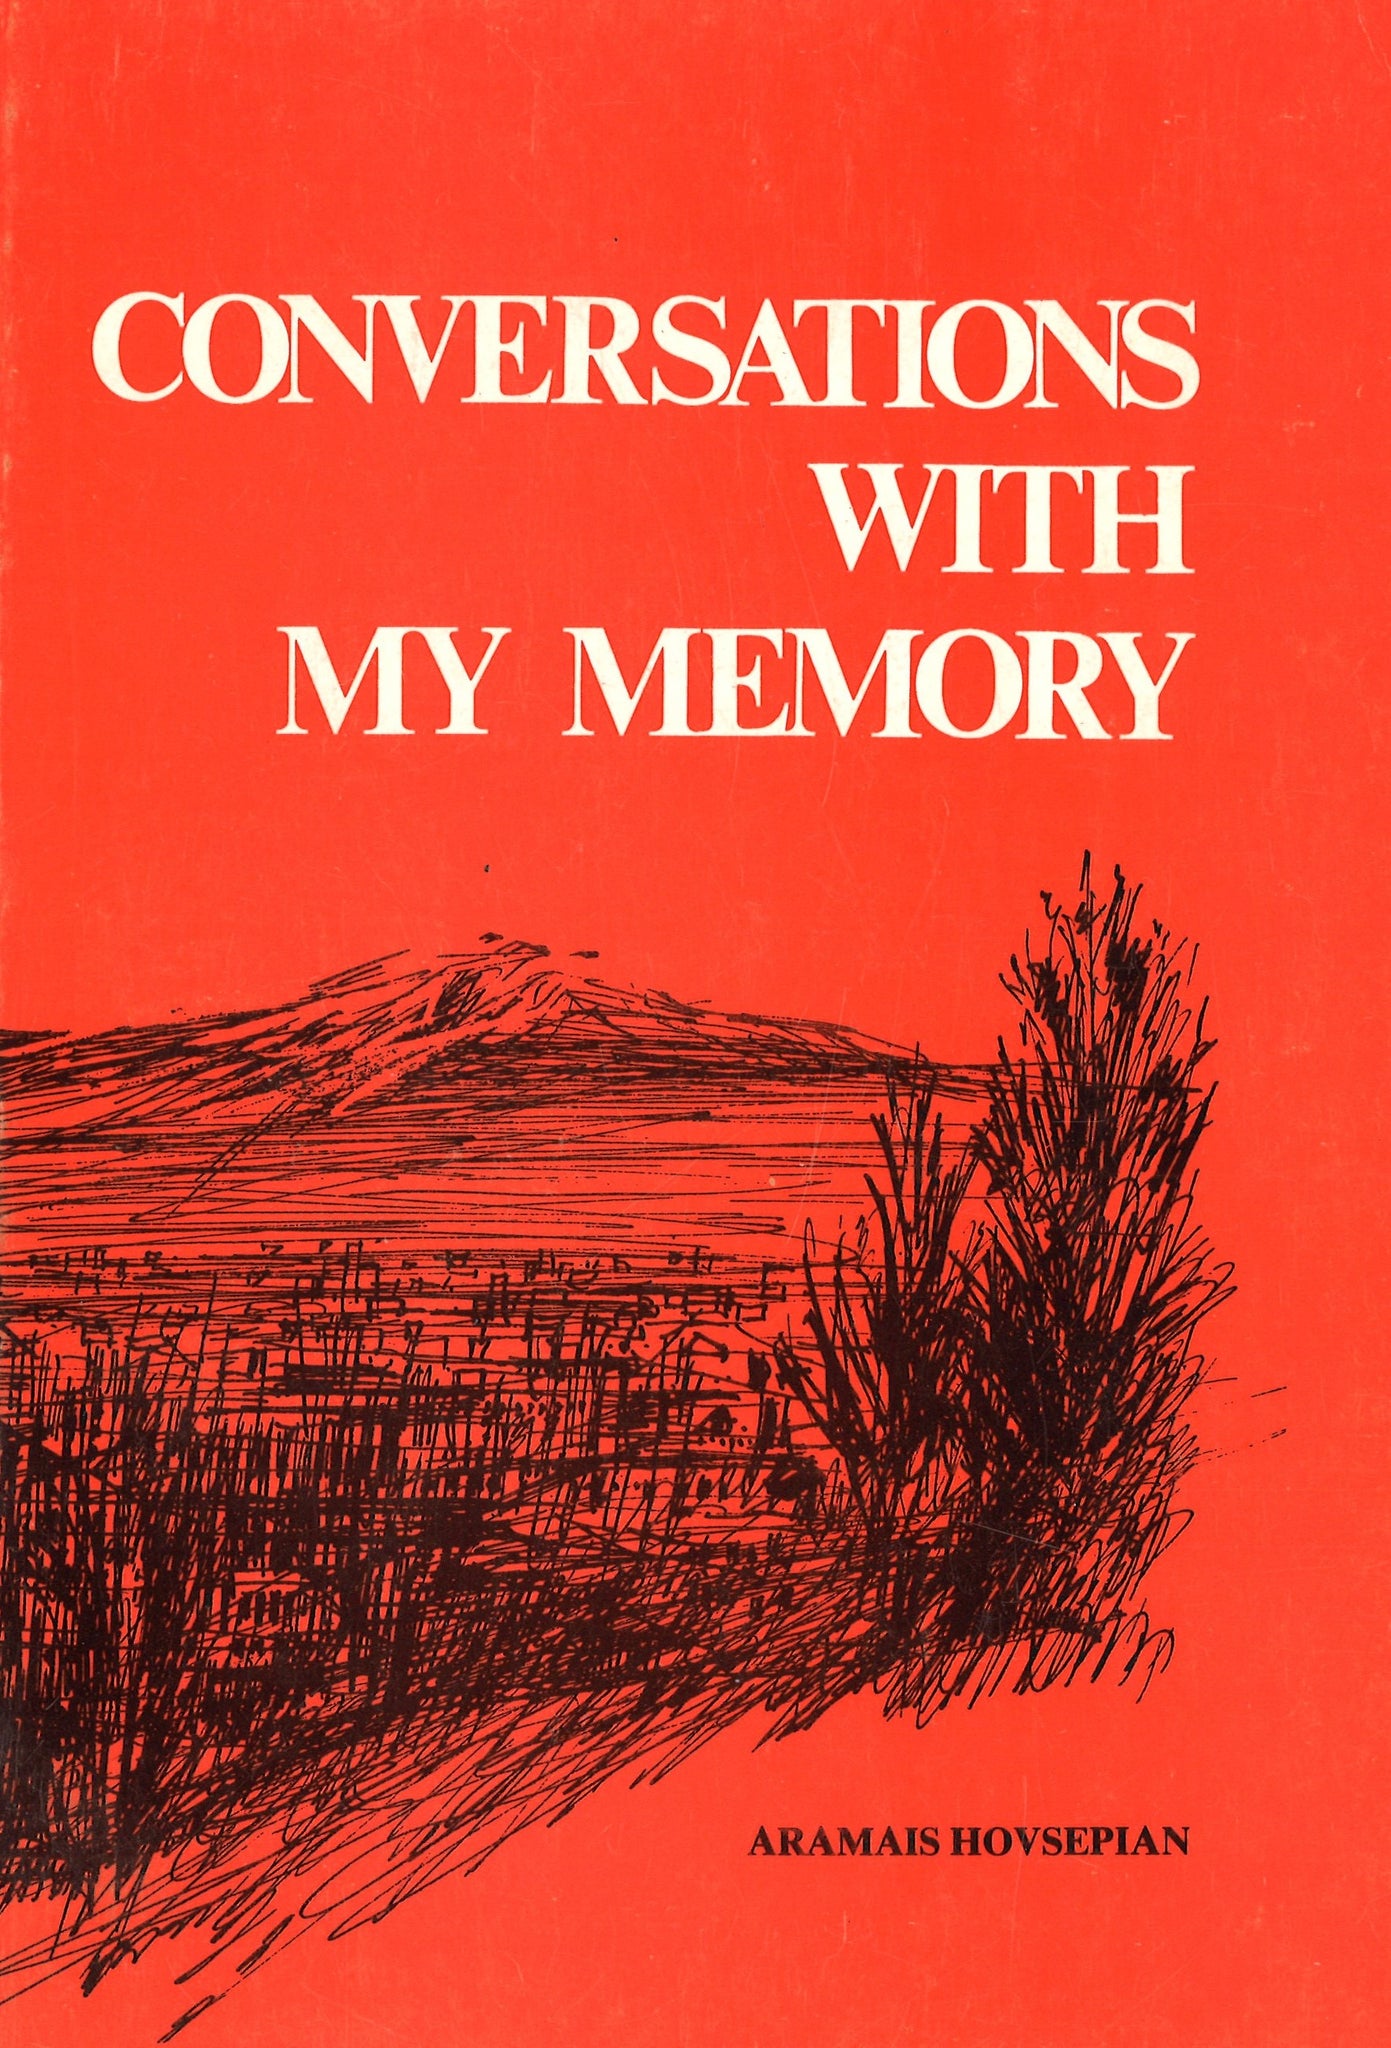 CONVERSATIONS WITH MY MEMORY